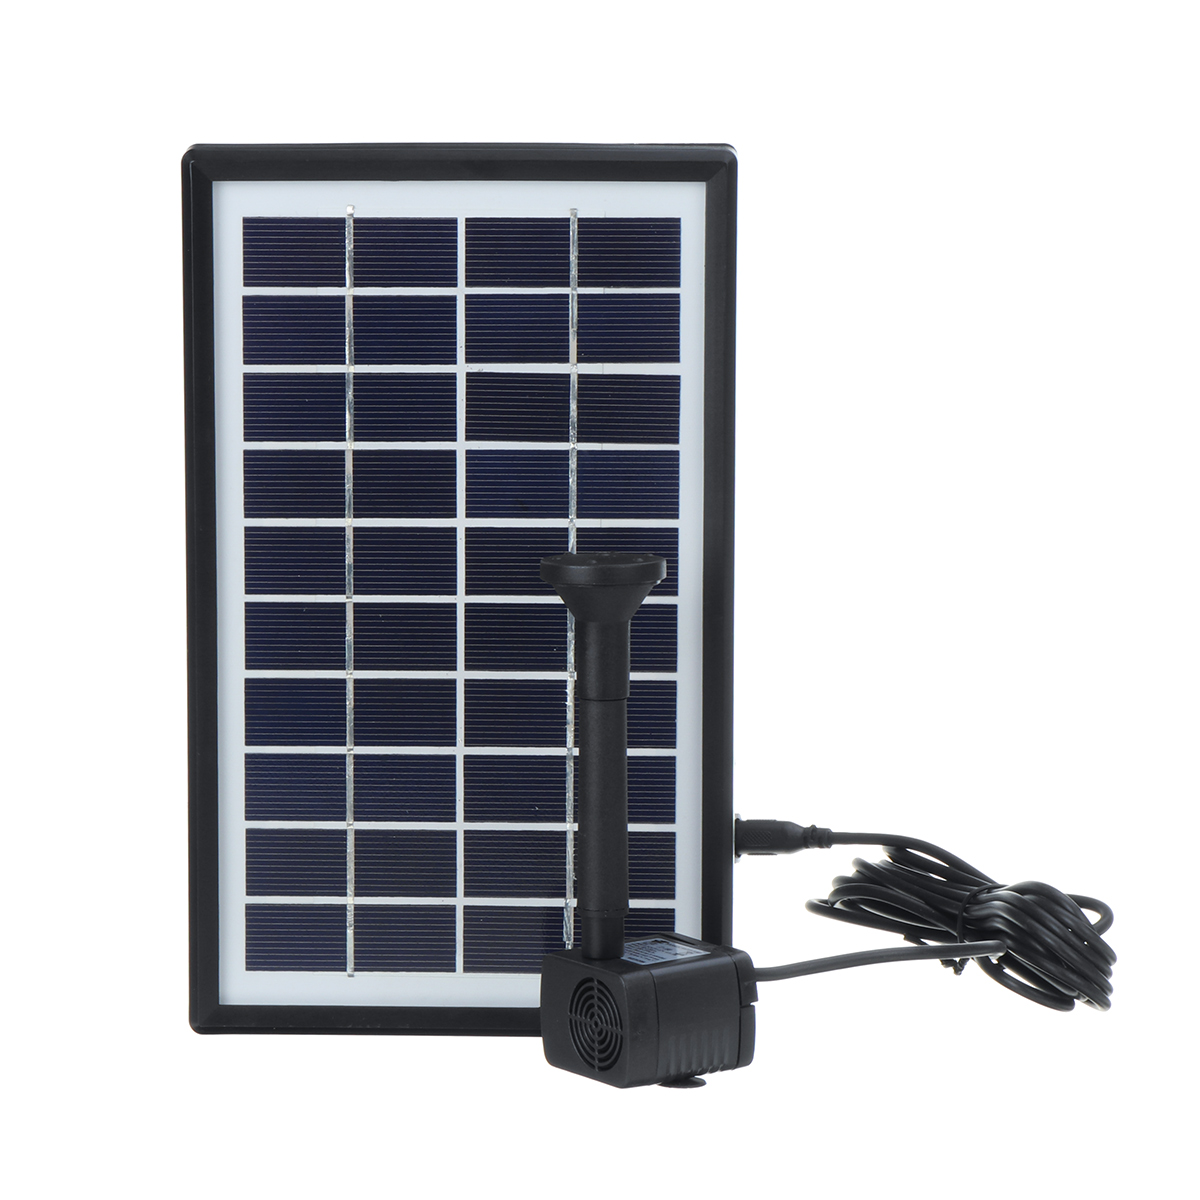 4W-10V-380LH-Solar-Panel-Water-Pump-Landscape-Pond-Pool-Aquarium-Floating-Fountain-with-6-Nozzles-1543610-6